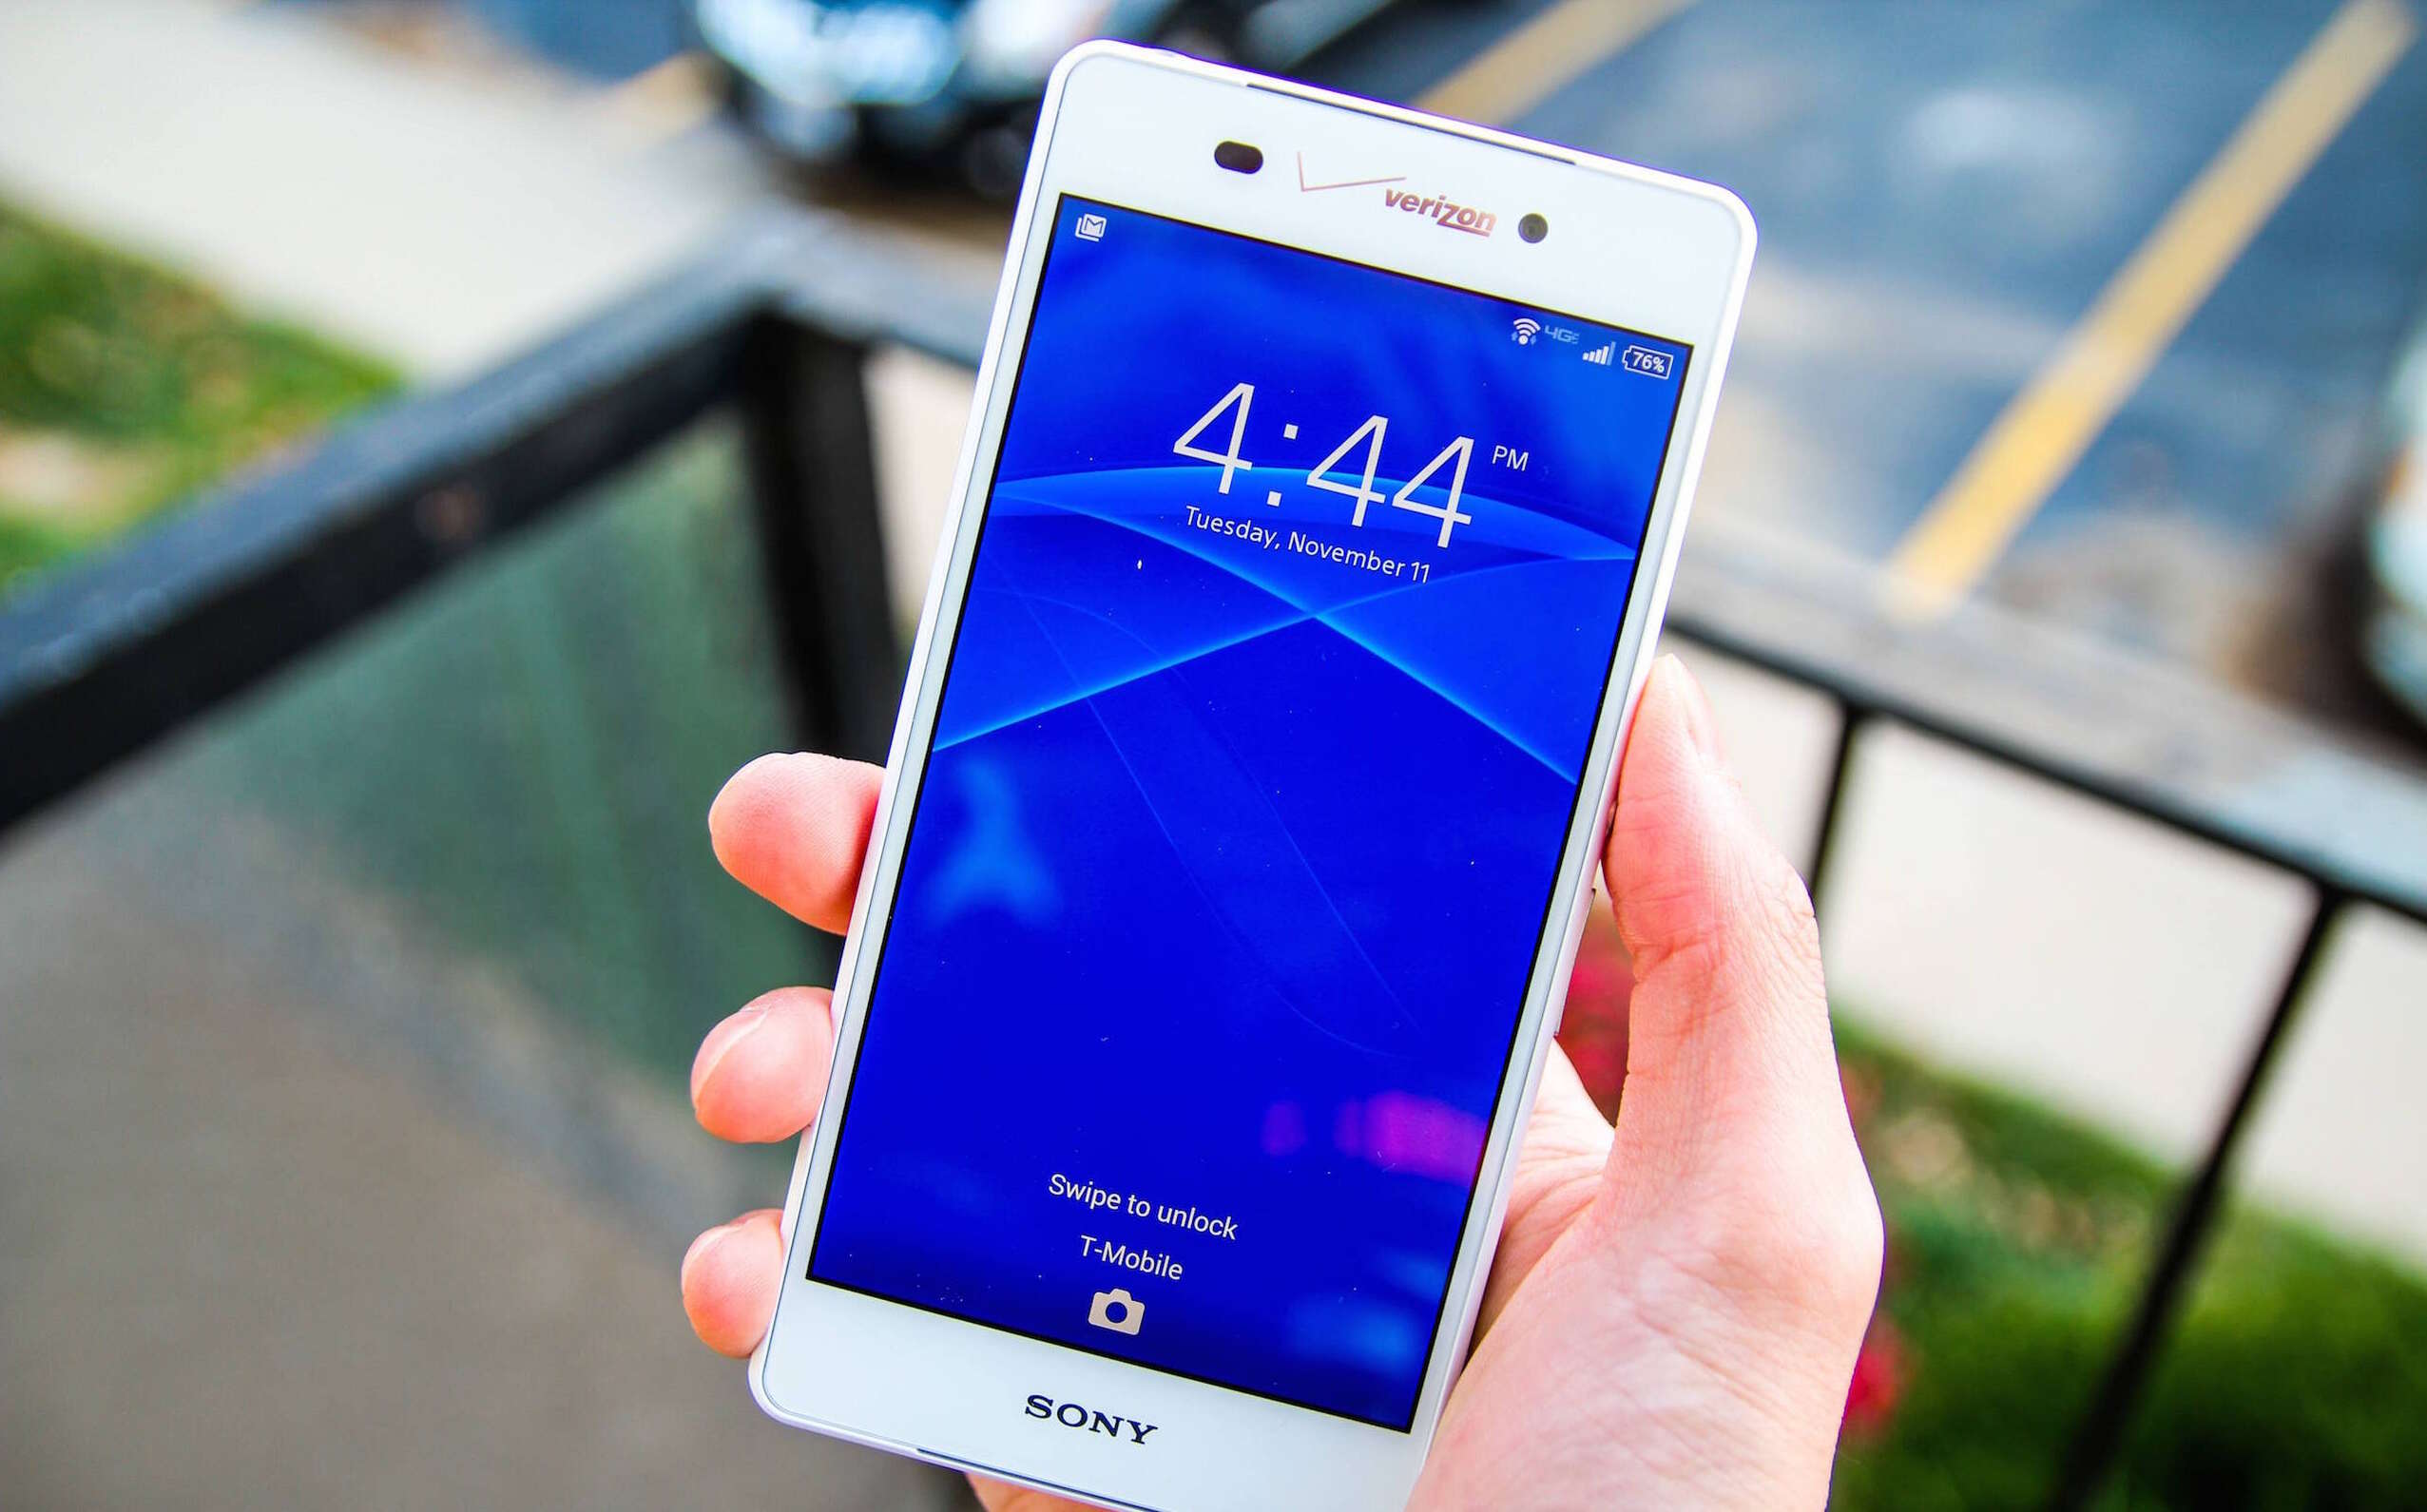 unlocking-xperia-z3-on-t-mobile-detailed-steps